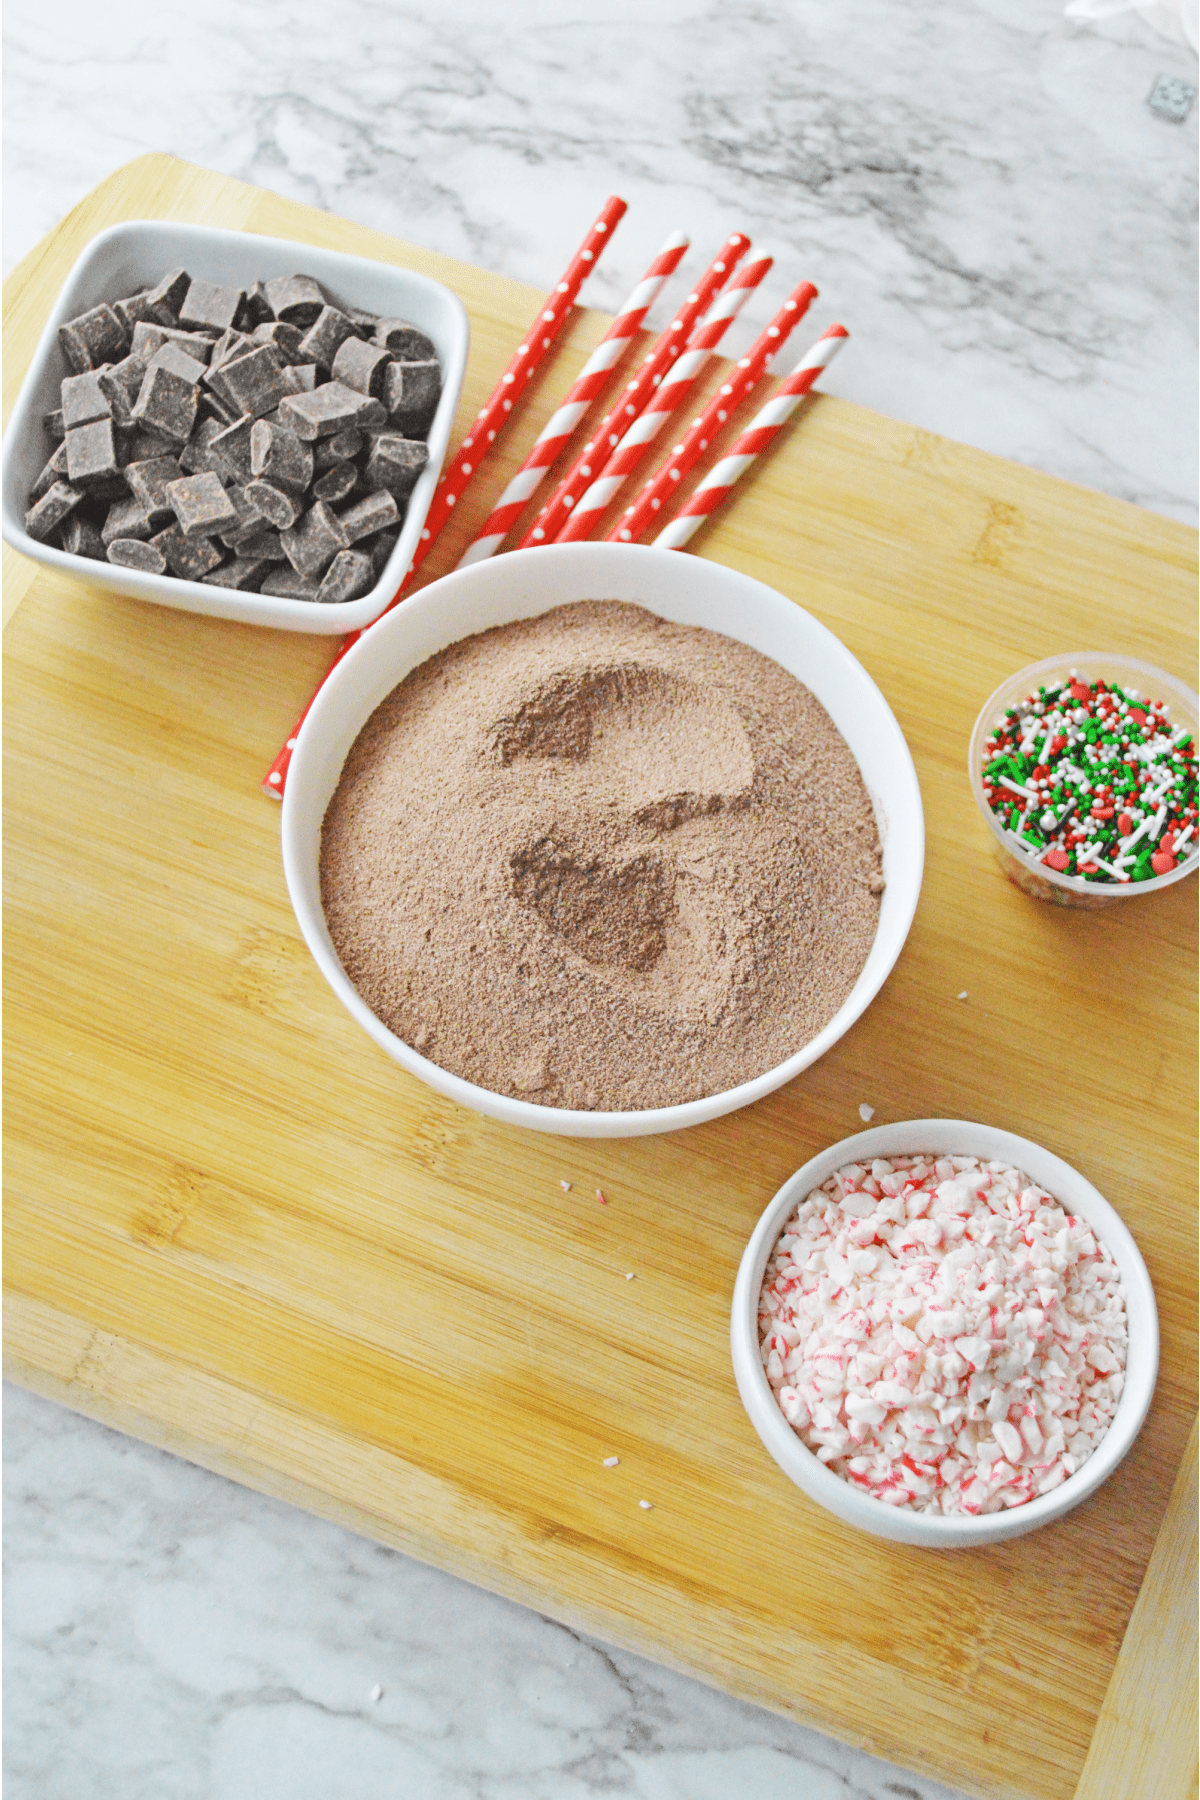 Hot chocolate mix with sprinkles and peppermint